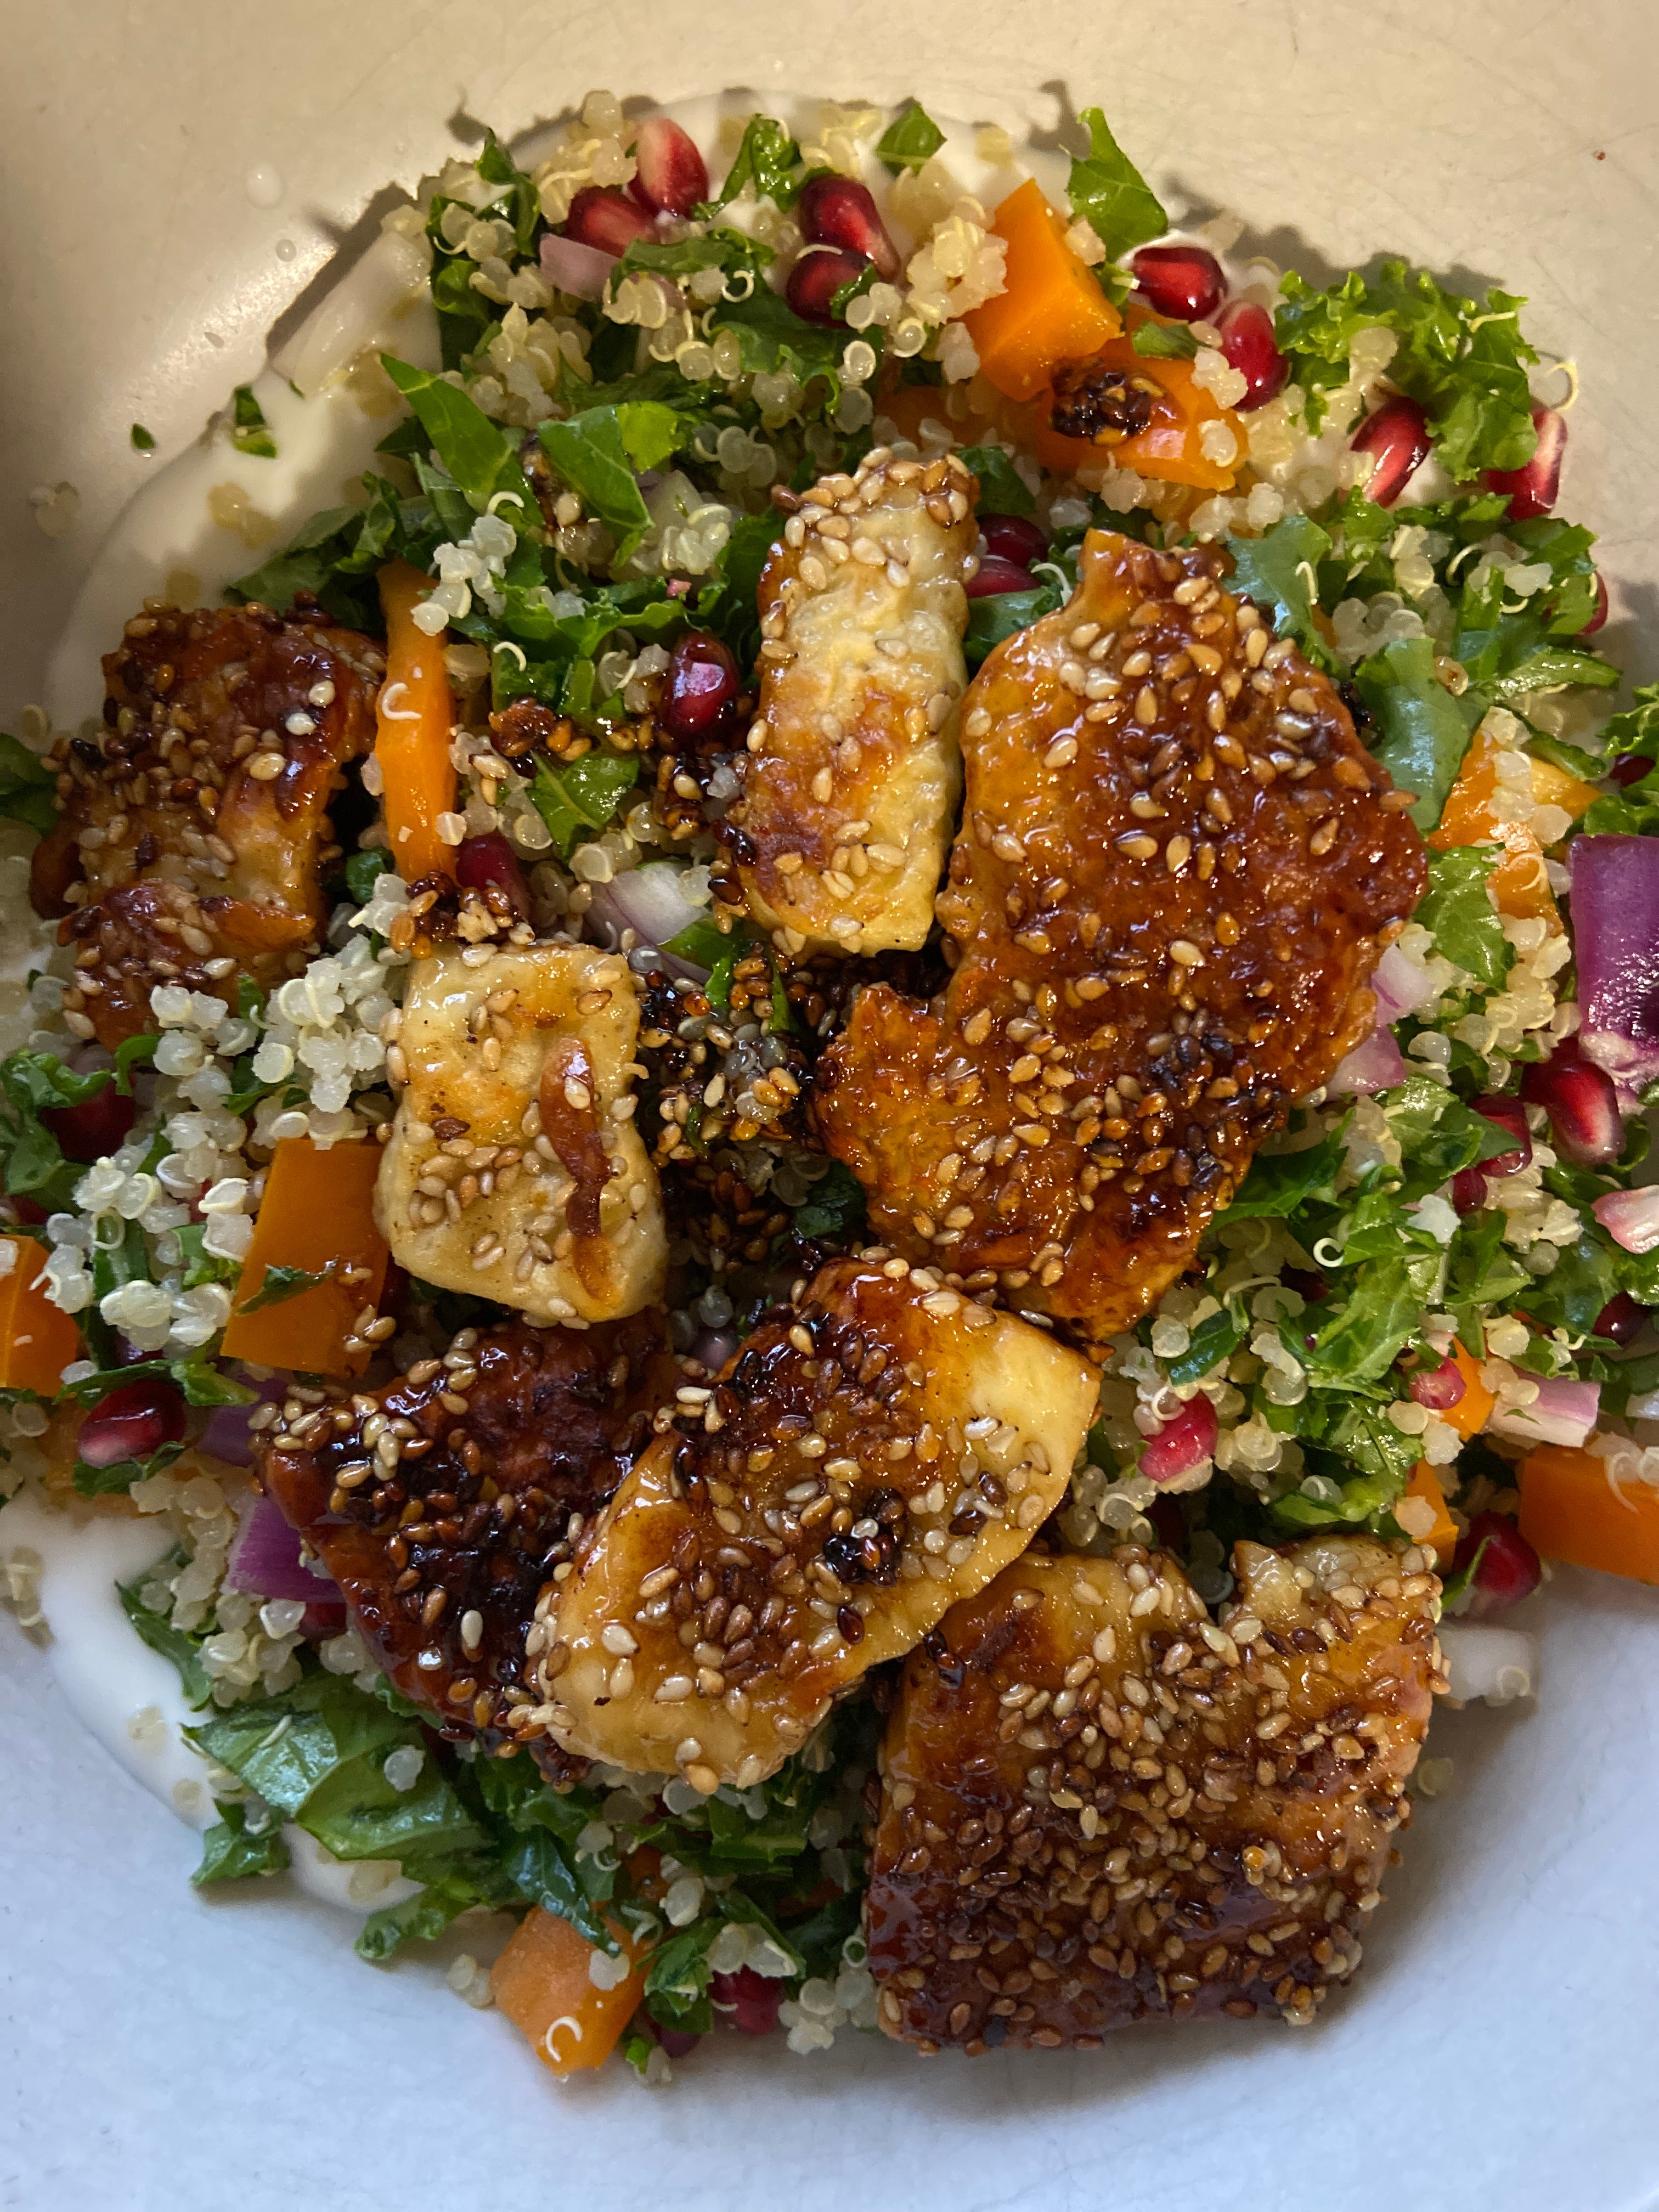 sesame coated halloumi sits on a bed of salad